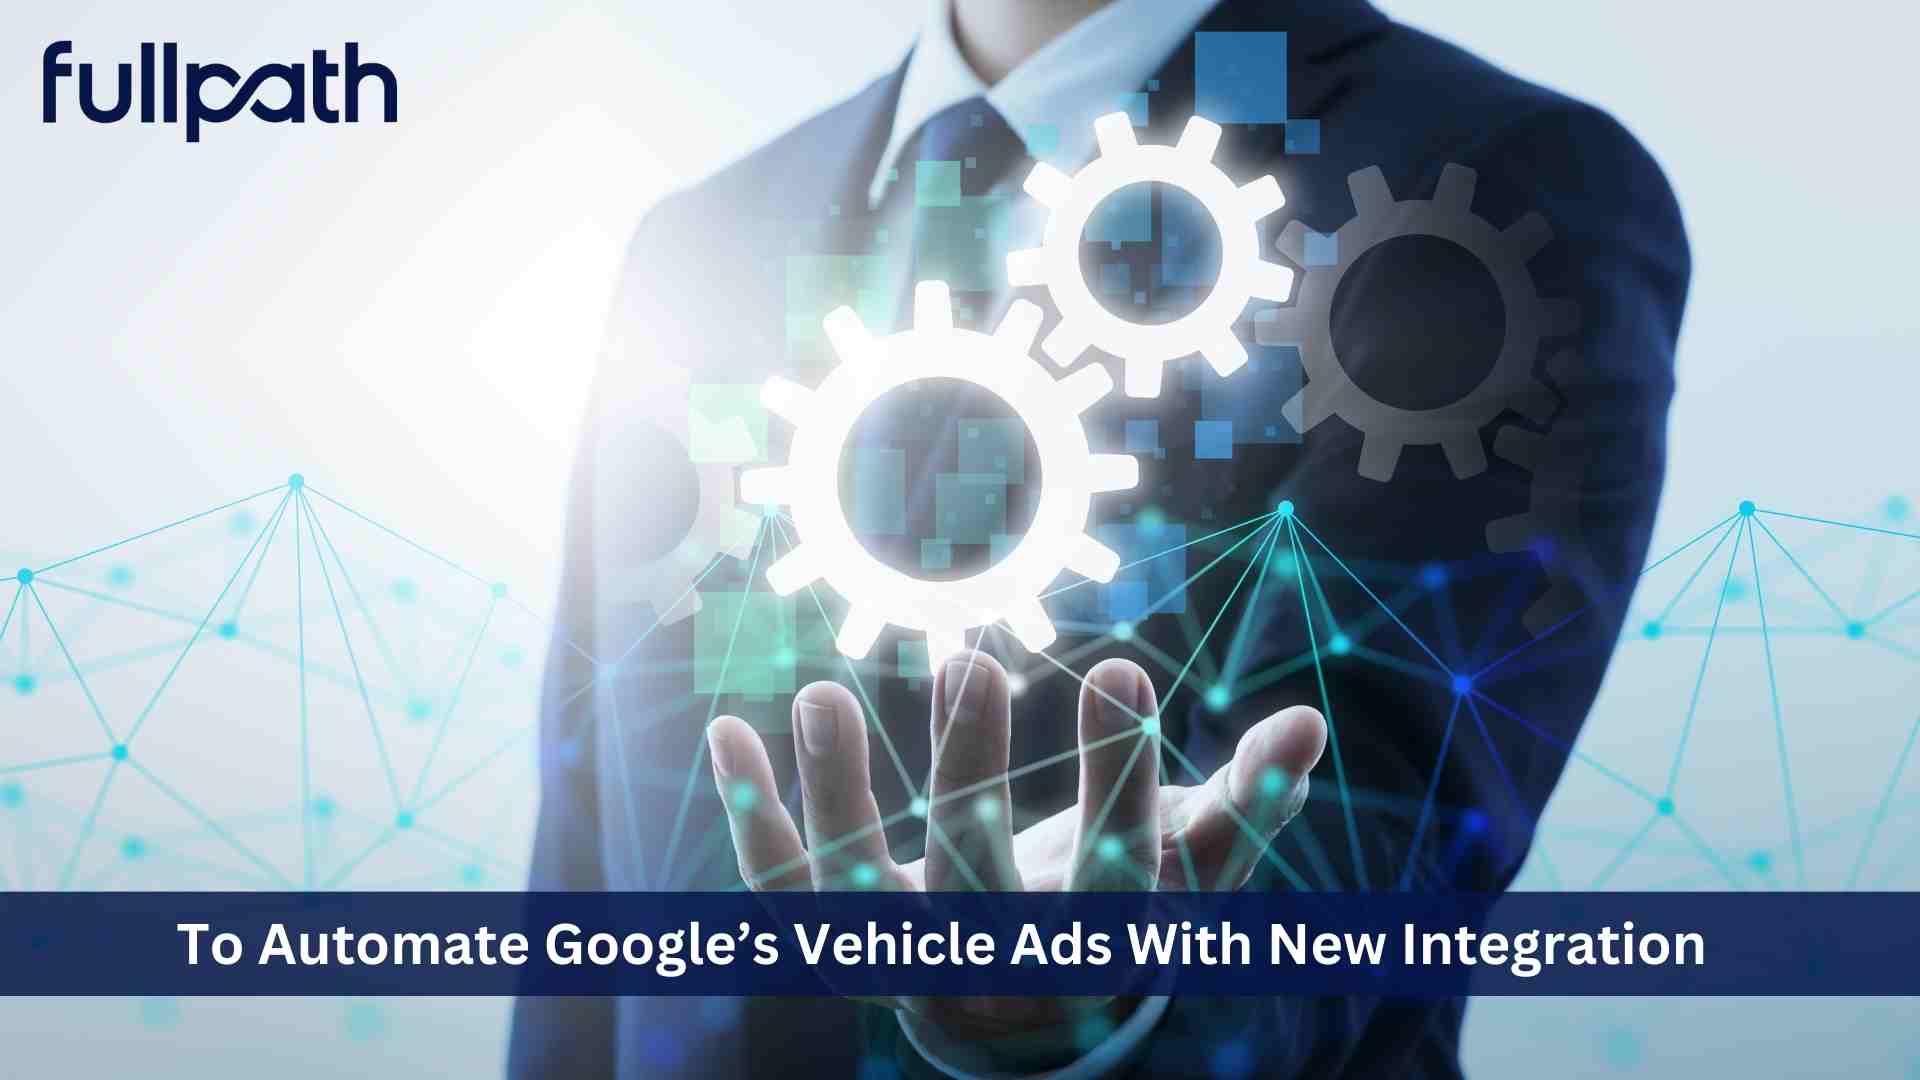 Fullpath to Automate Google's Vehicle Ads with New Integration